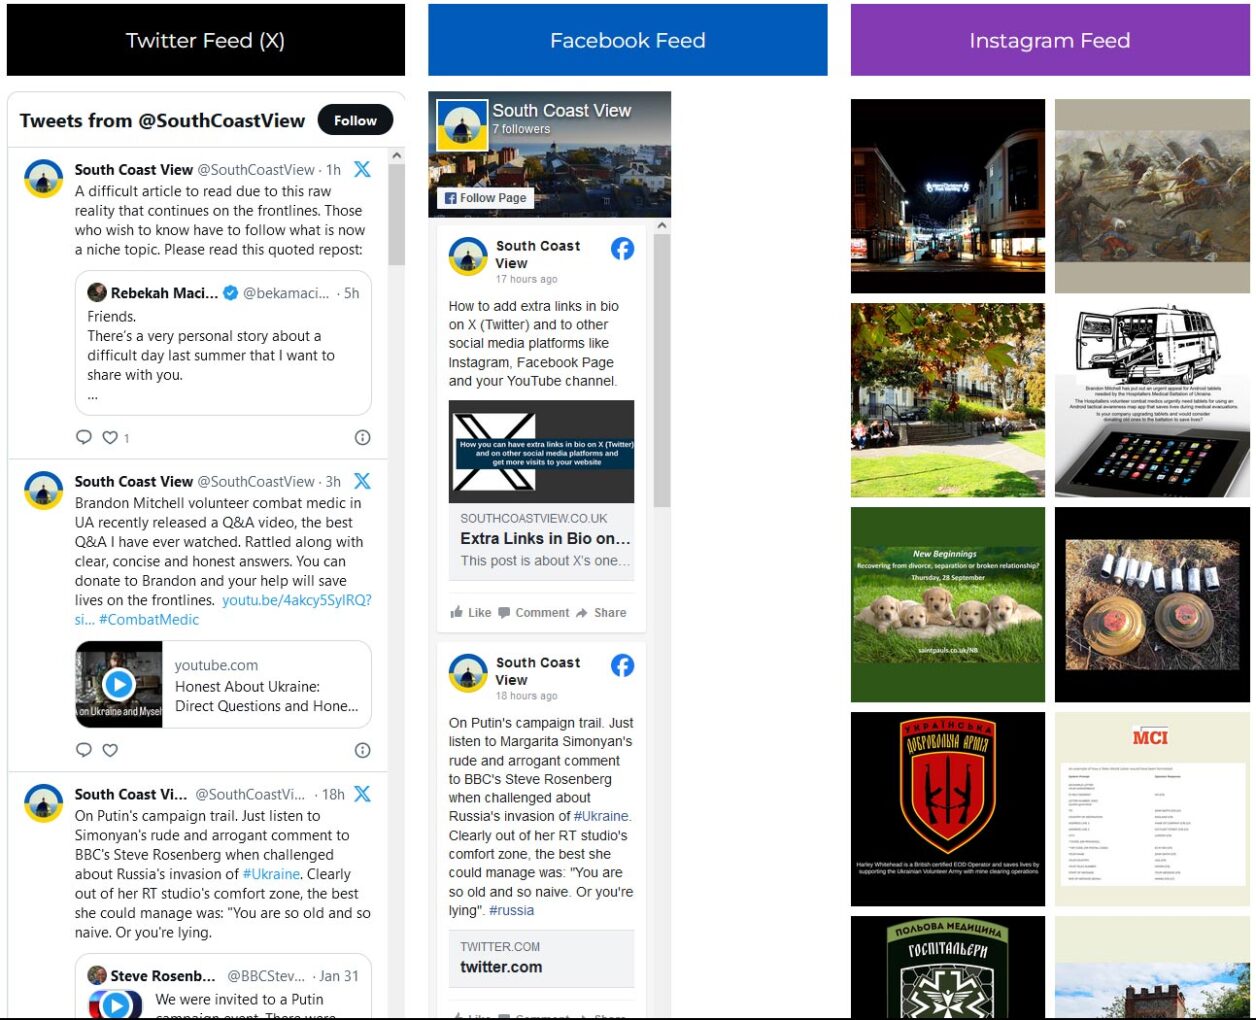 Embedded social media posts on South Coast View’s website.